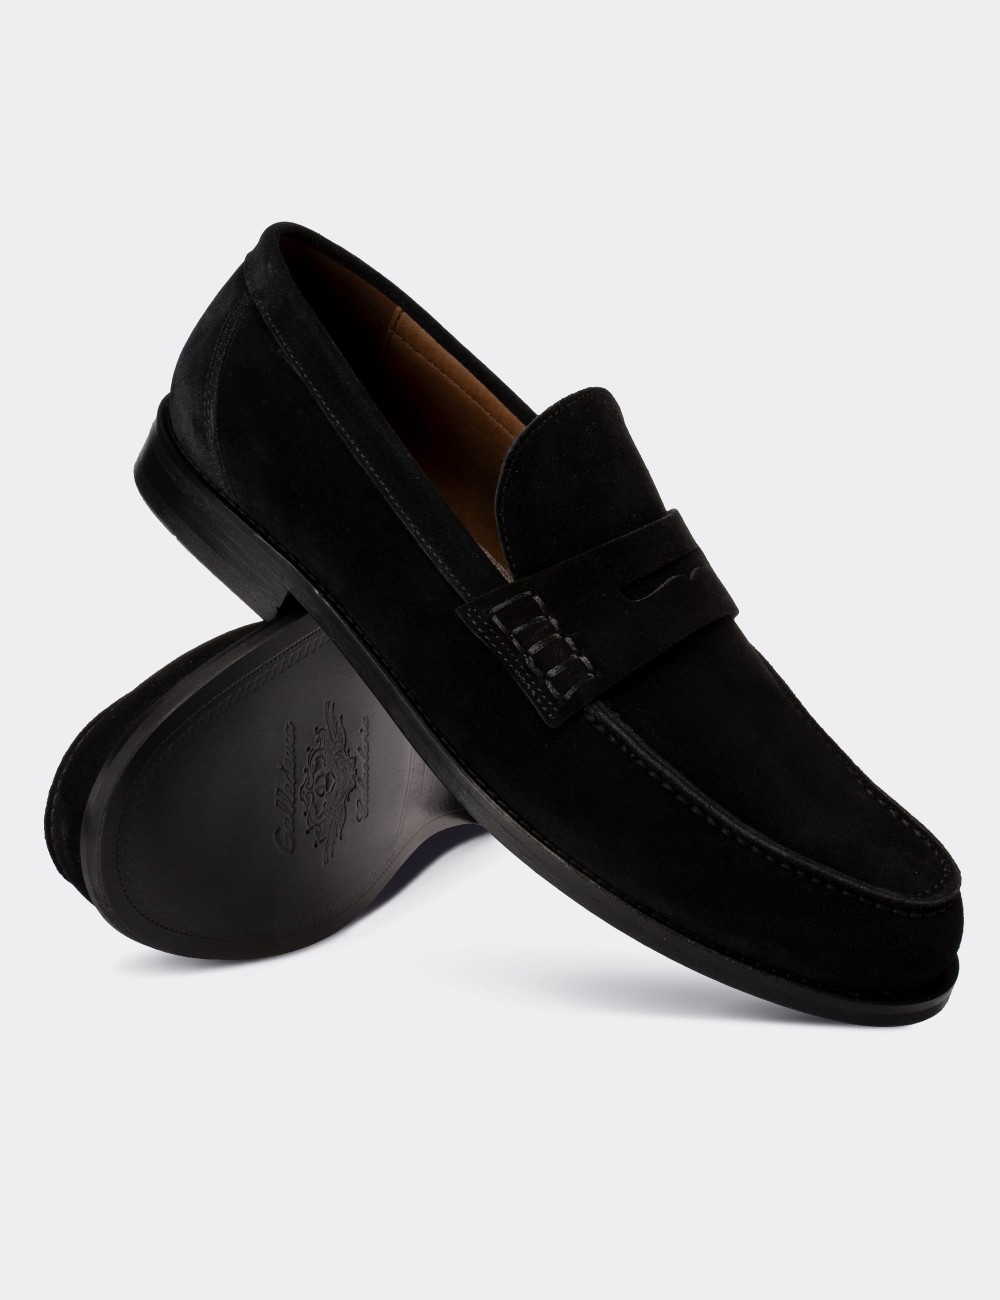 Black Suede Leather Loafers - Deery